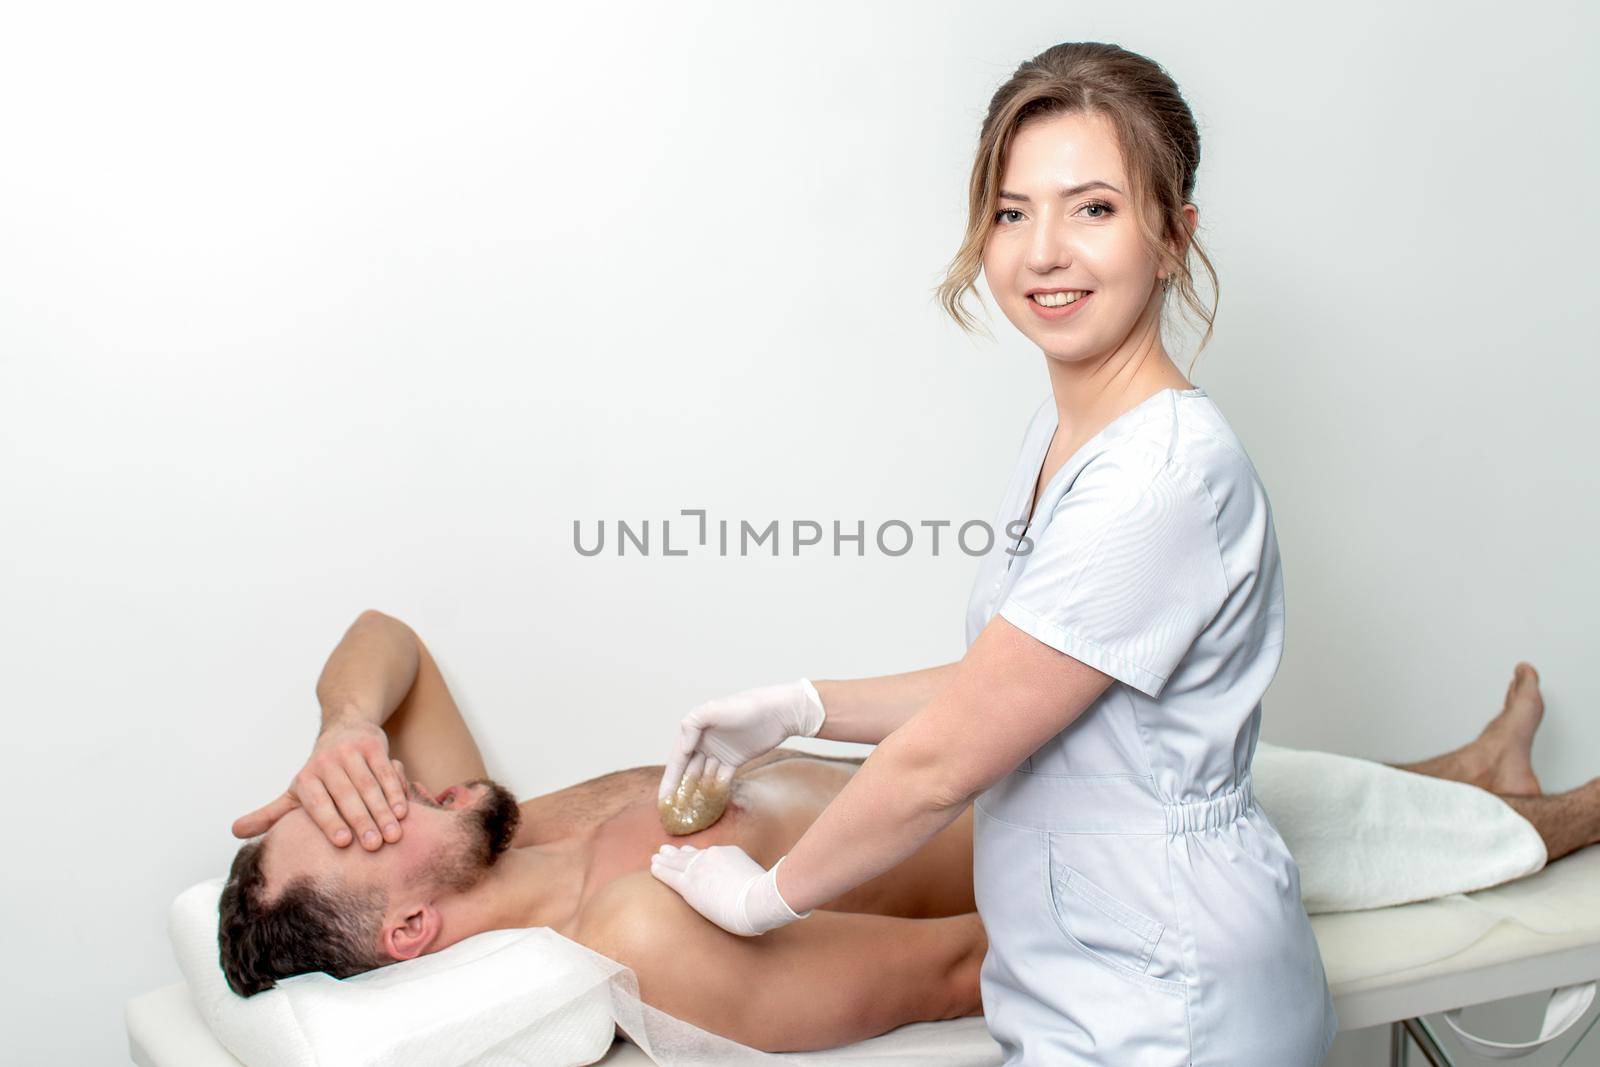 Young man receiving waxing chest by young female cosmetologist in beauty salon. Portrait of young female cosmetologist during waxing male chest